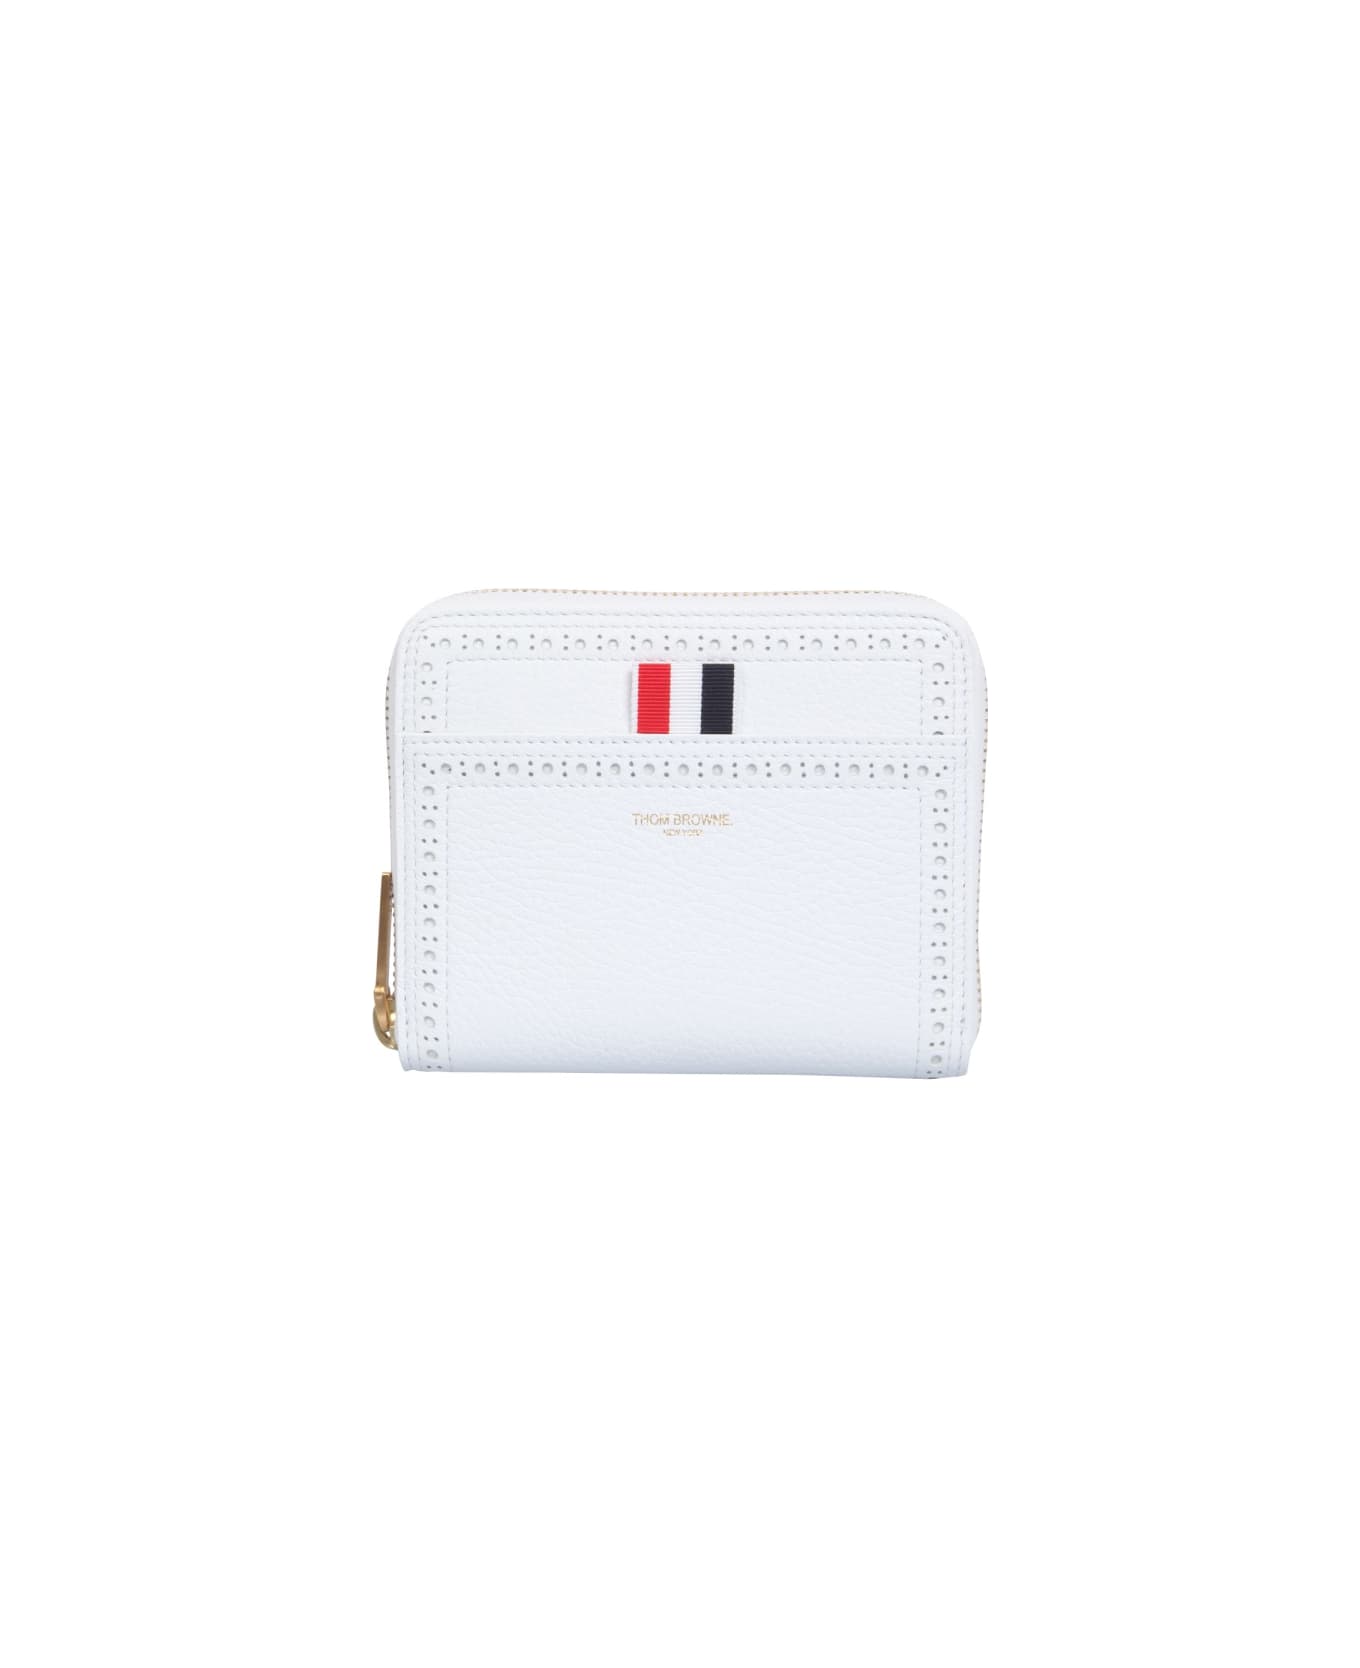 Thom Browne Wallet With Zip - WHITE